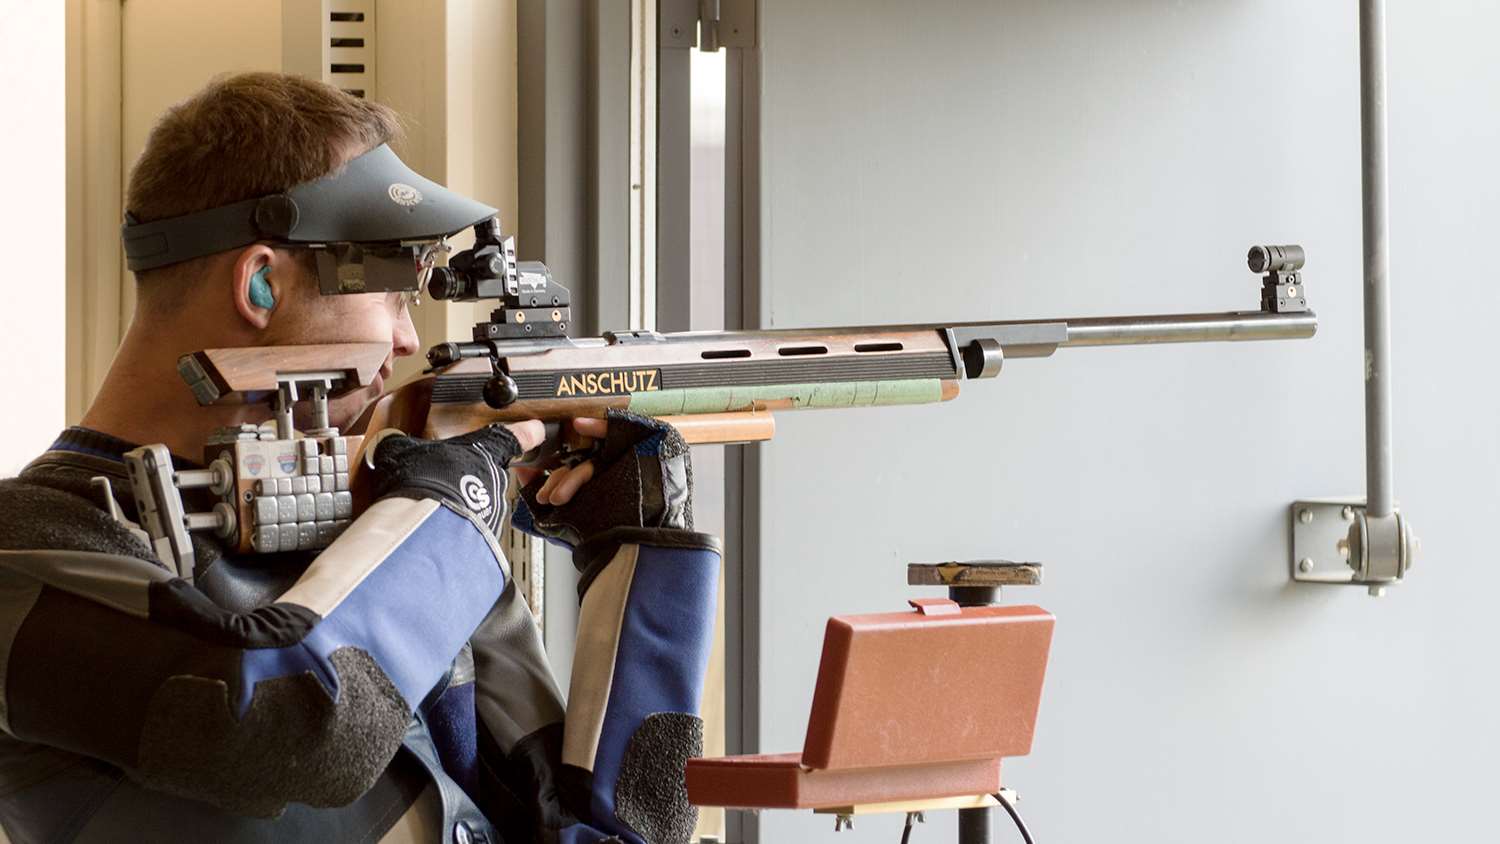 Collegiate rifle shooter displaying trigger technique